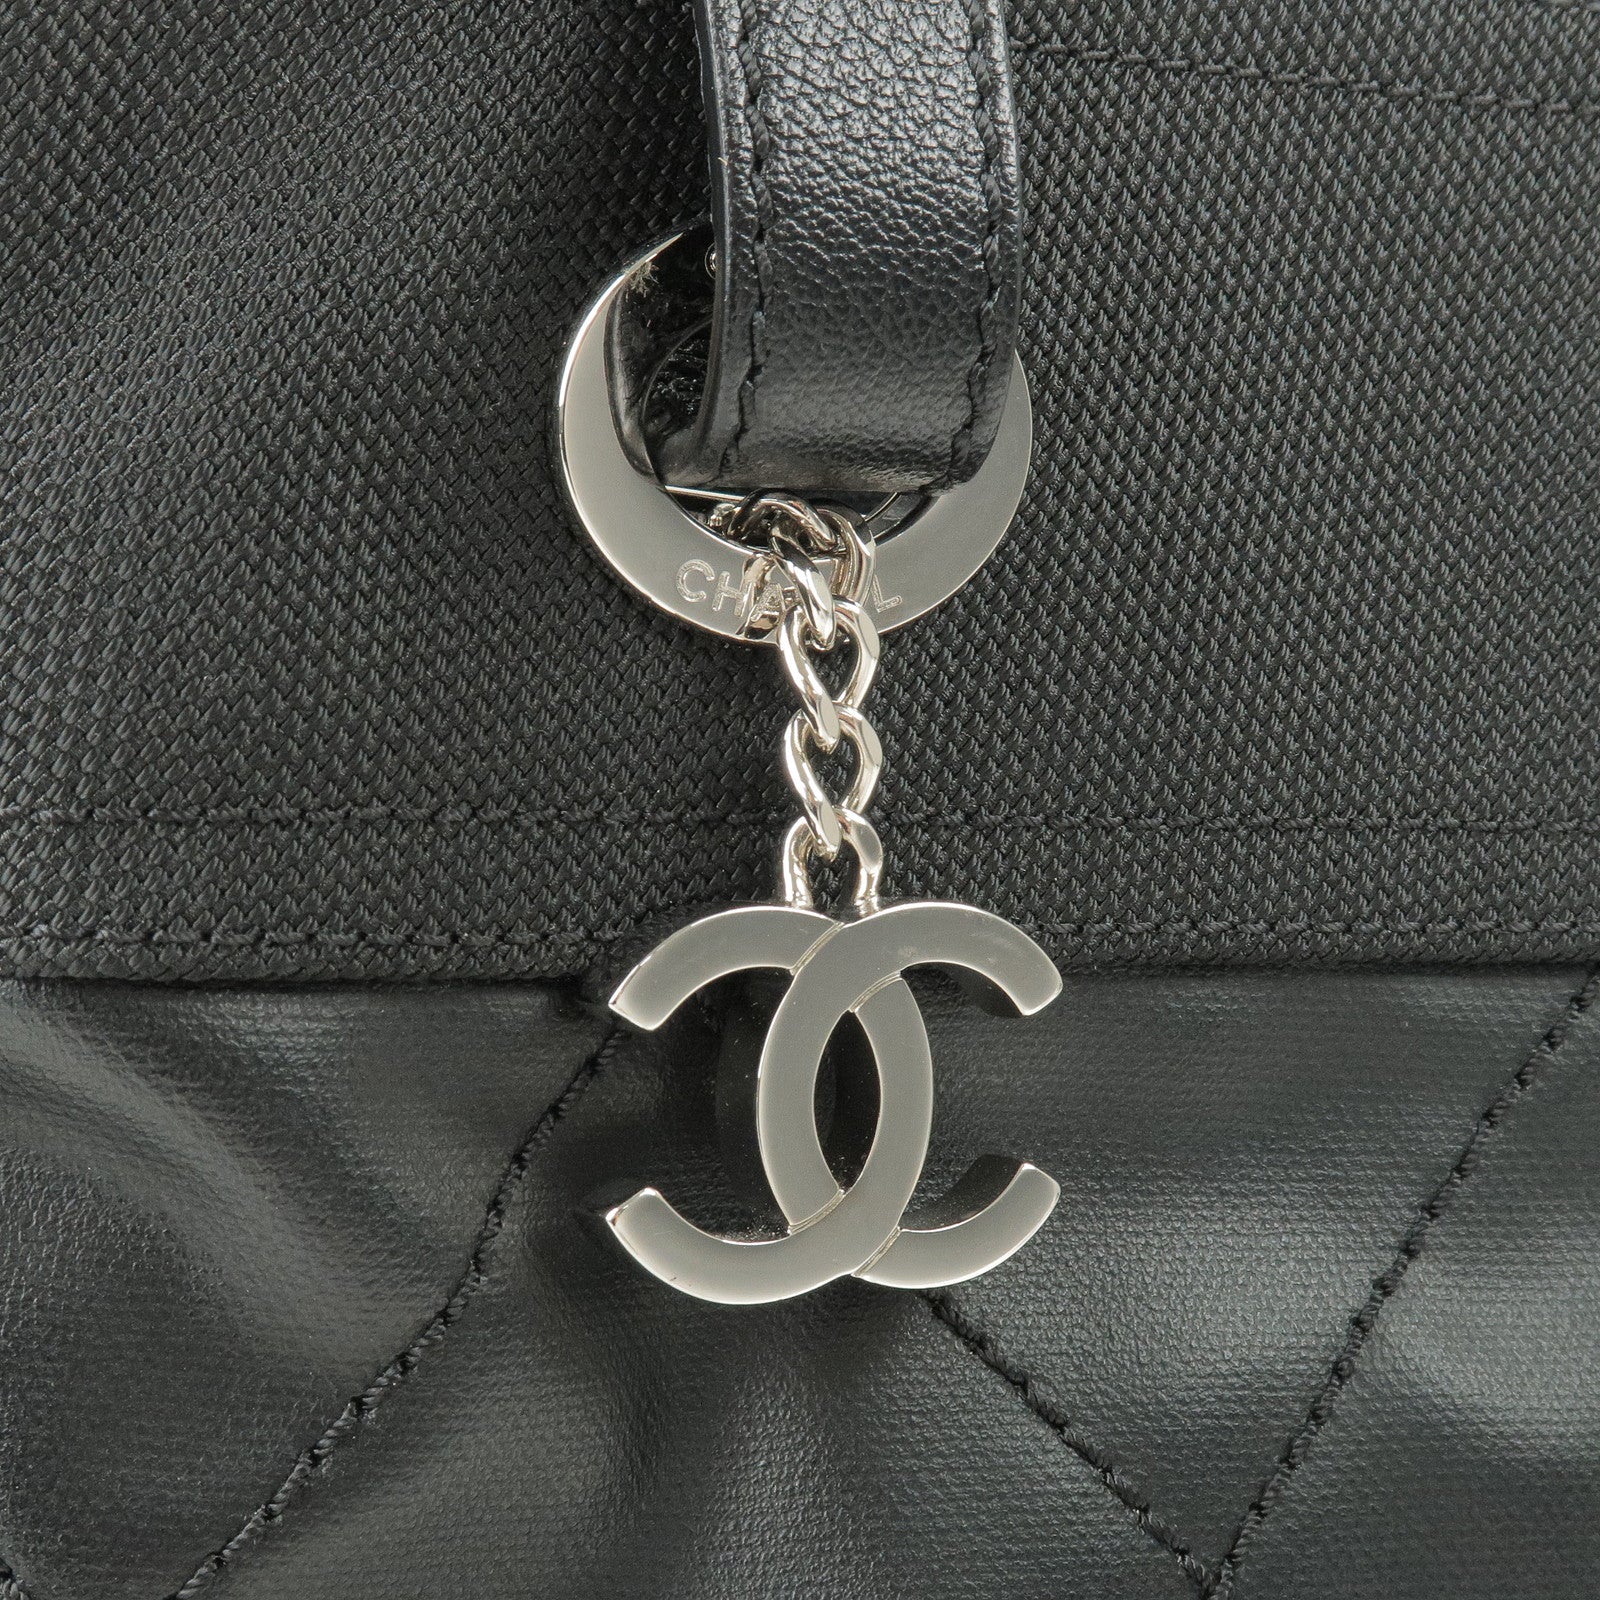 White Chanel Bag With Handle - 87 For Sale on 1stDibs